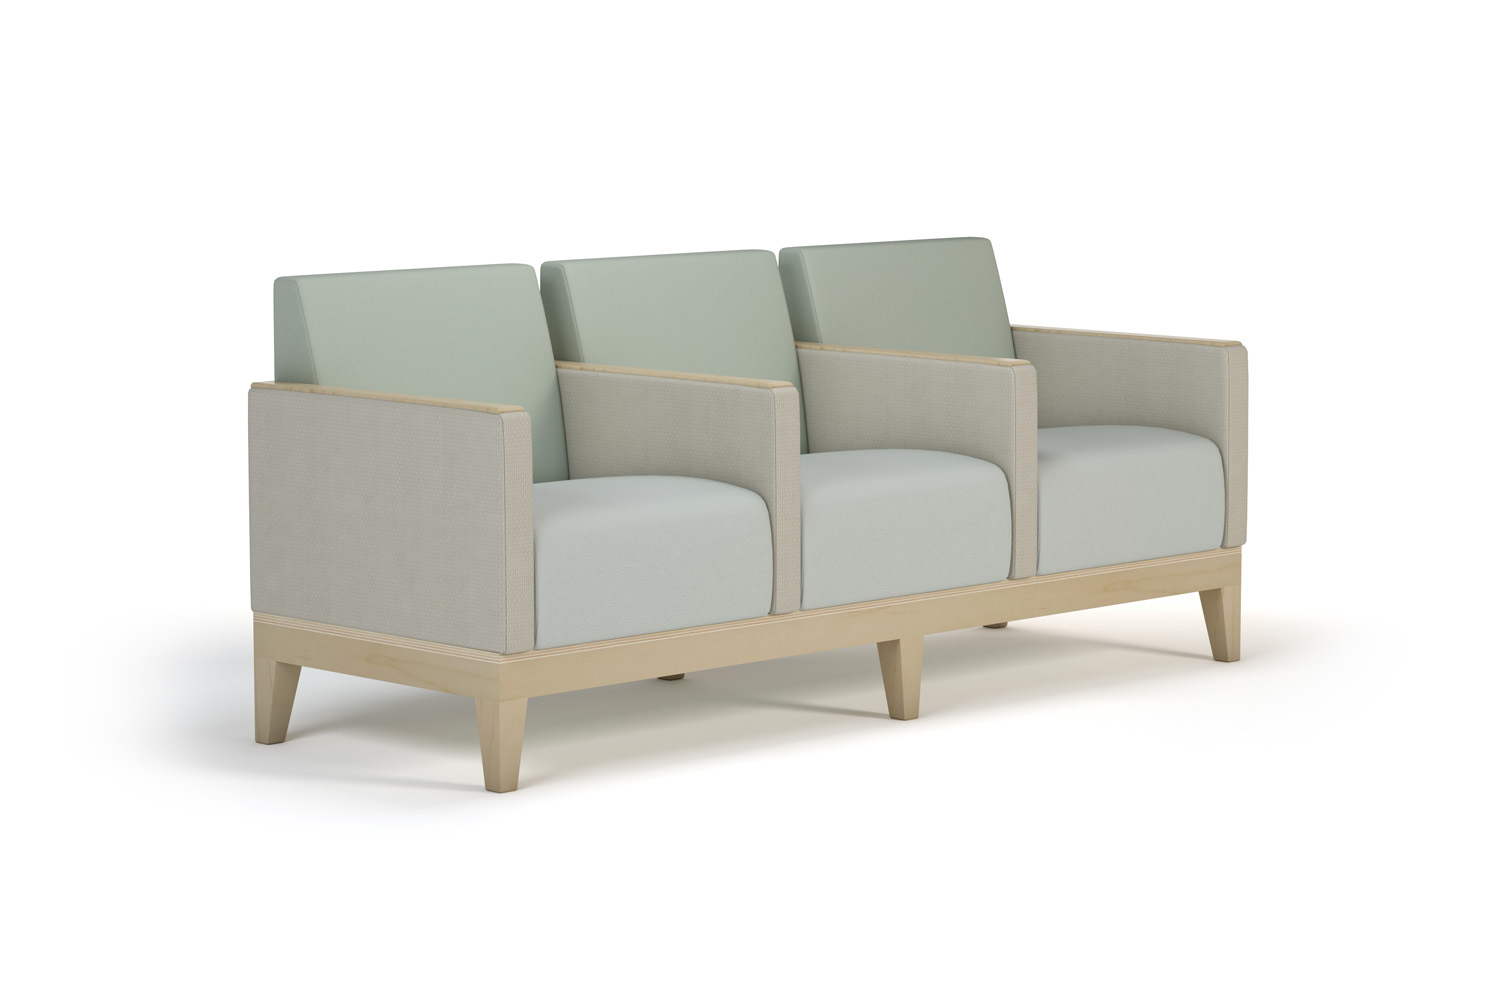 Ojai Three Seat Lounge with Inside and Outside Arms